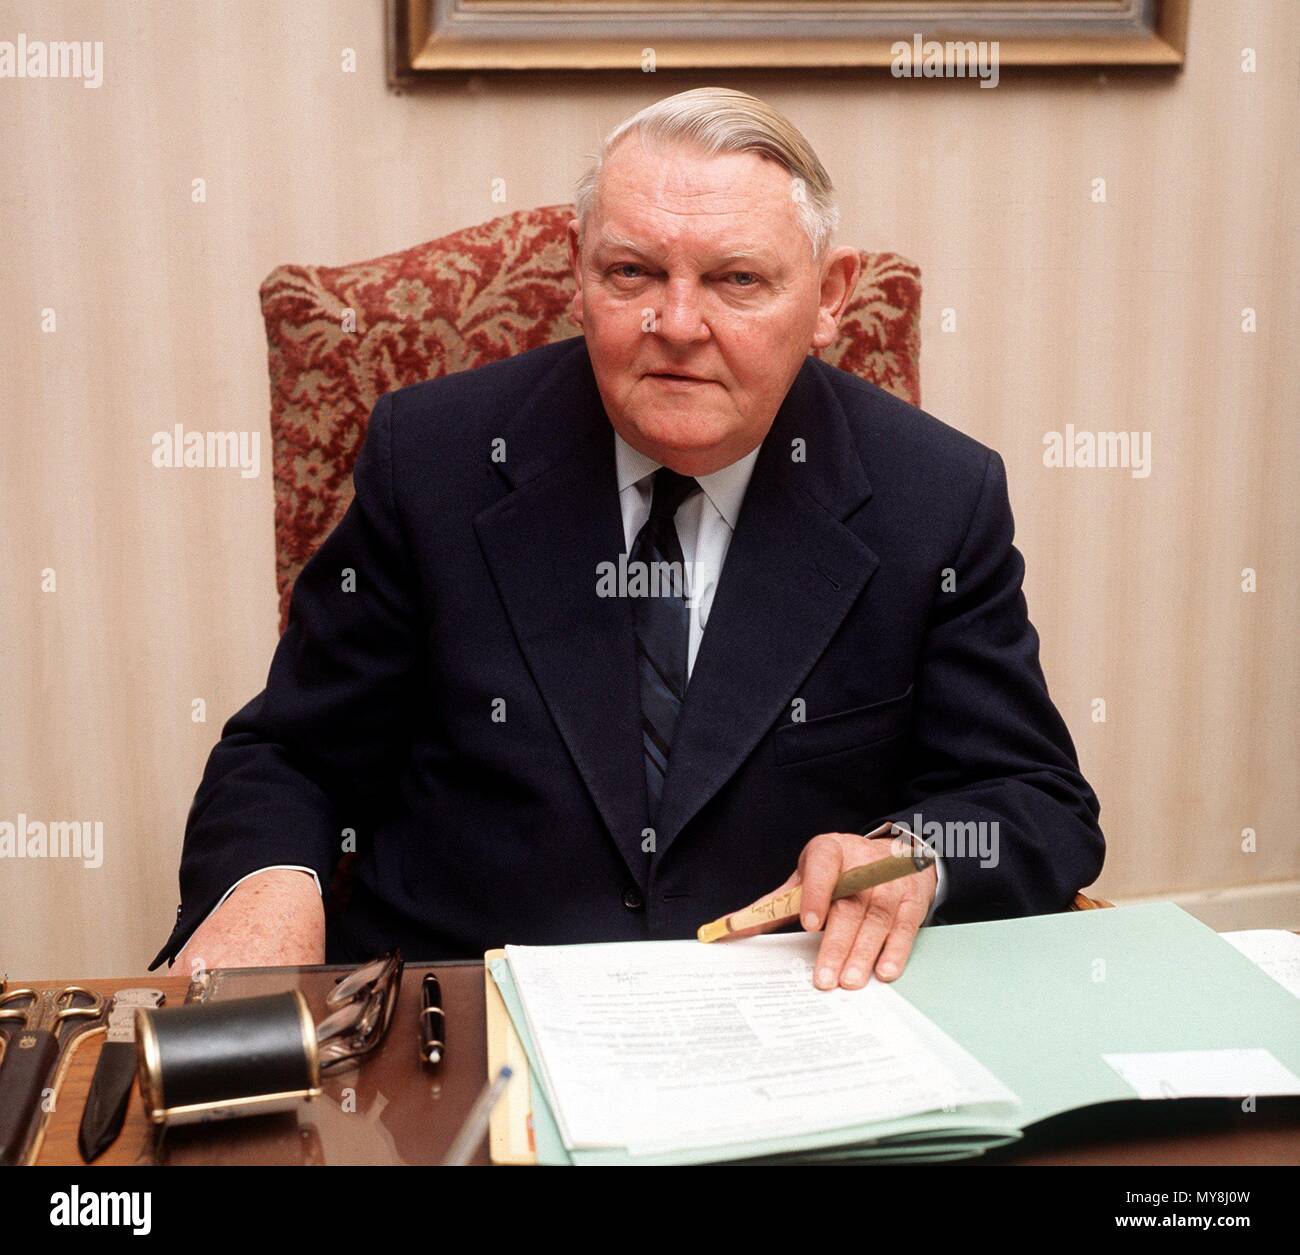 Ludwig Erhard, pictured at his desk at Palais Schaumburg in Bonn, Germany, in the 1960s. Erhard was Economy Minister of the Federal Republic of Germany from 1949 to 1963, and chancellor from 1963 to 1966. | usage worldwide Stock Photo